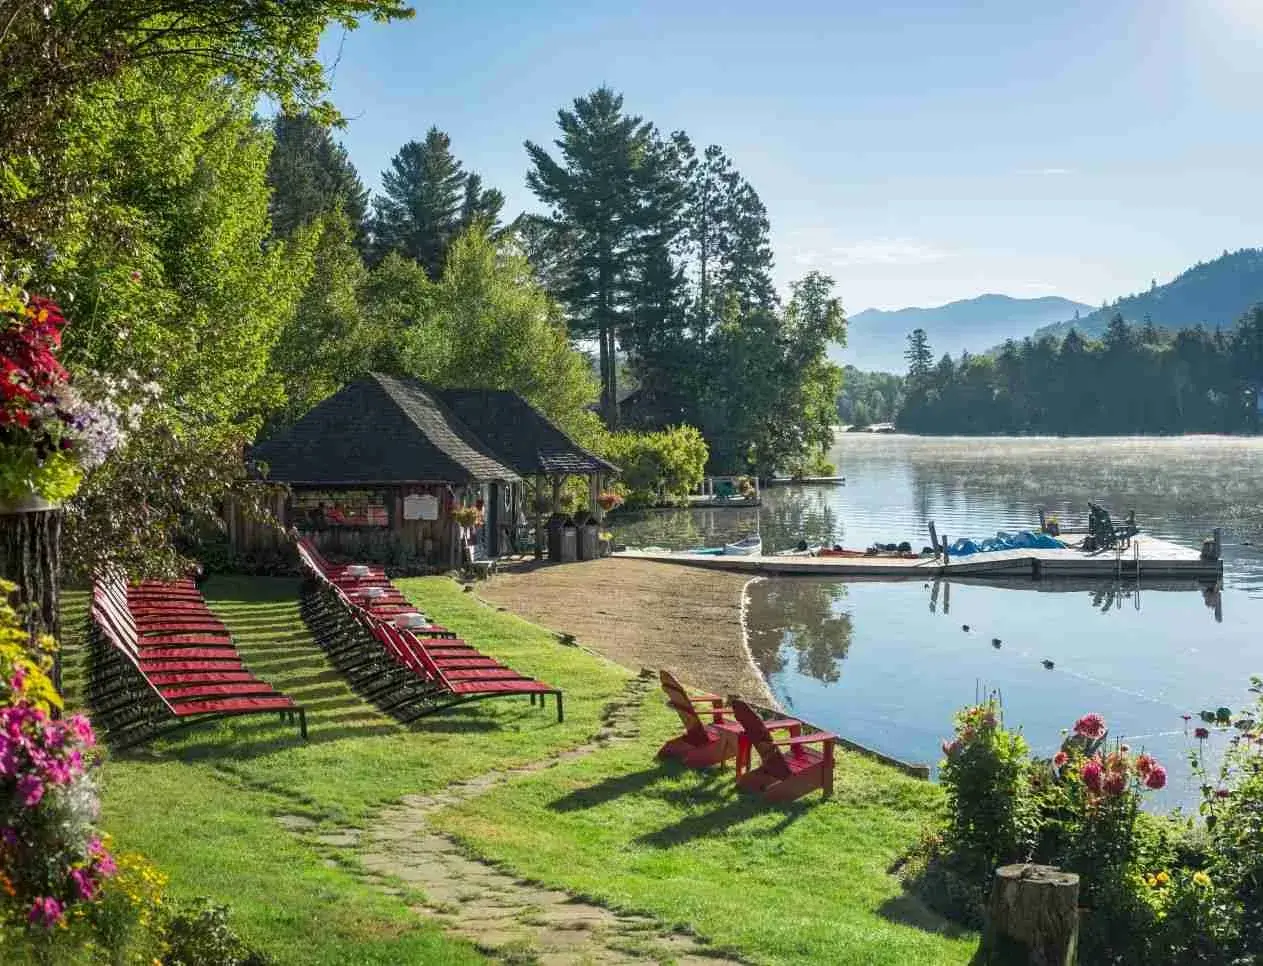 private beach beside lake with lounge chairs on grass